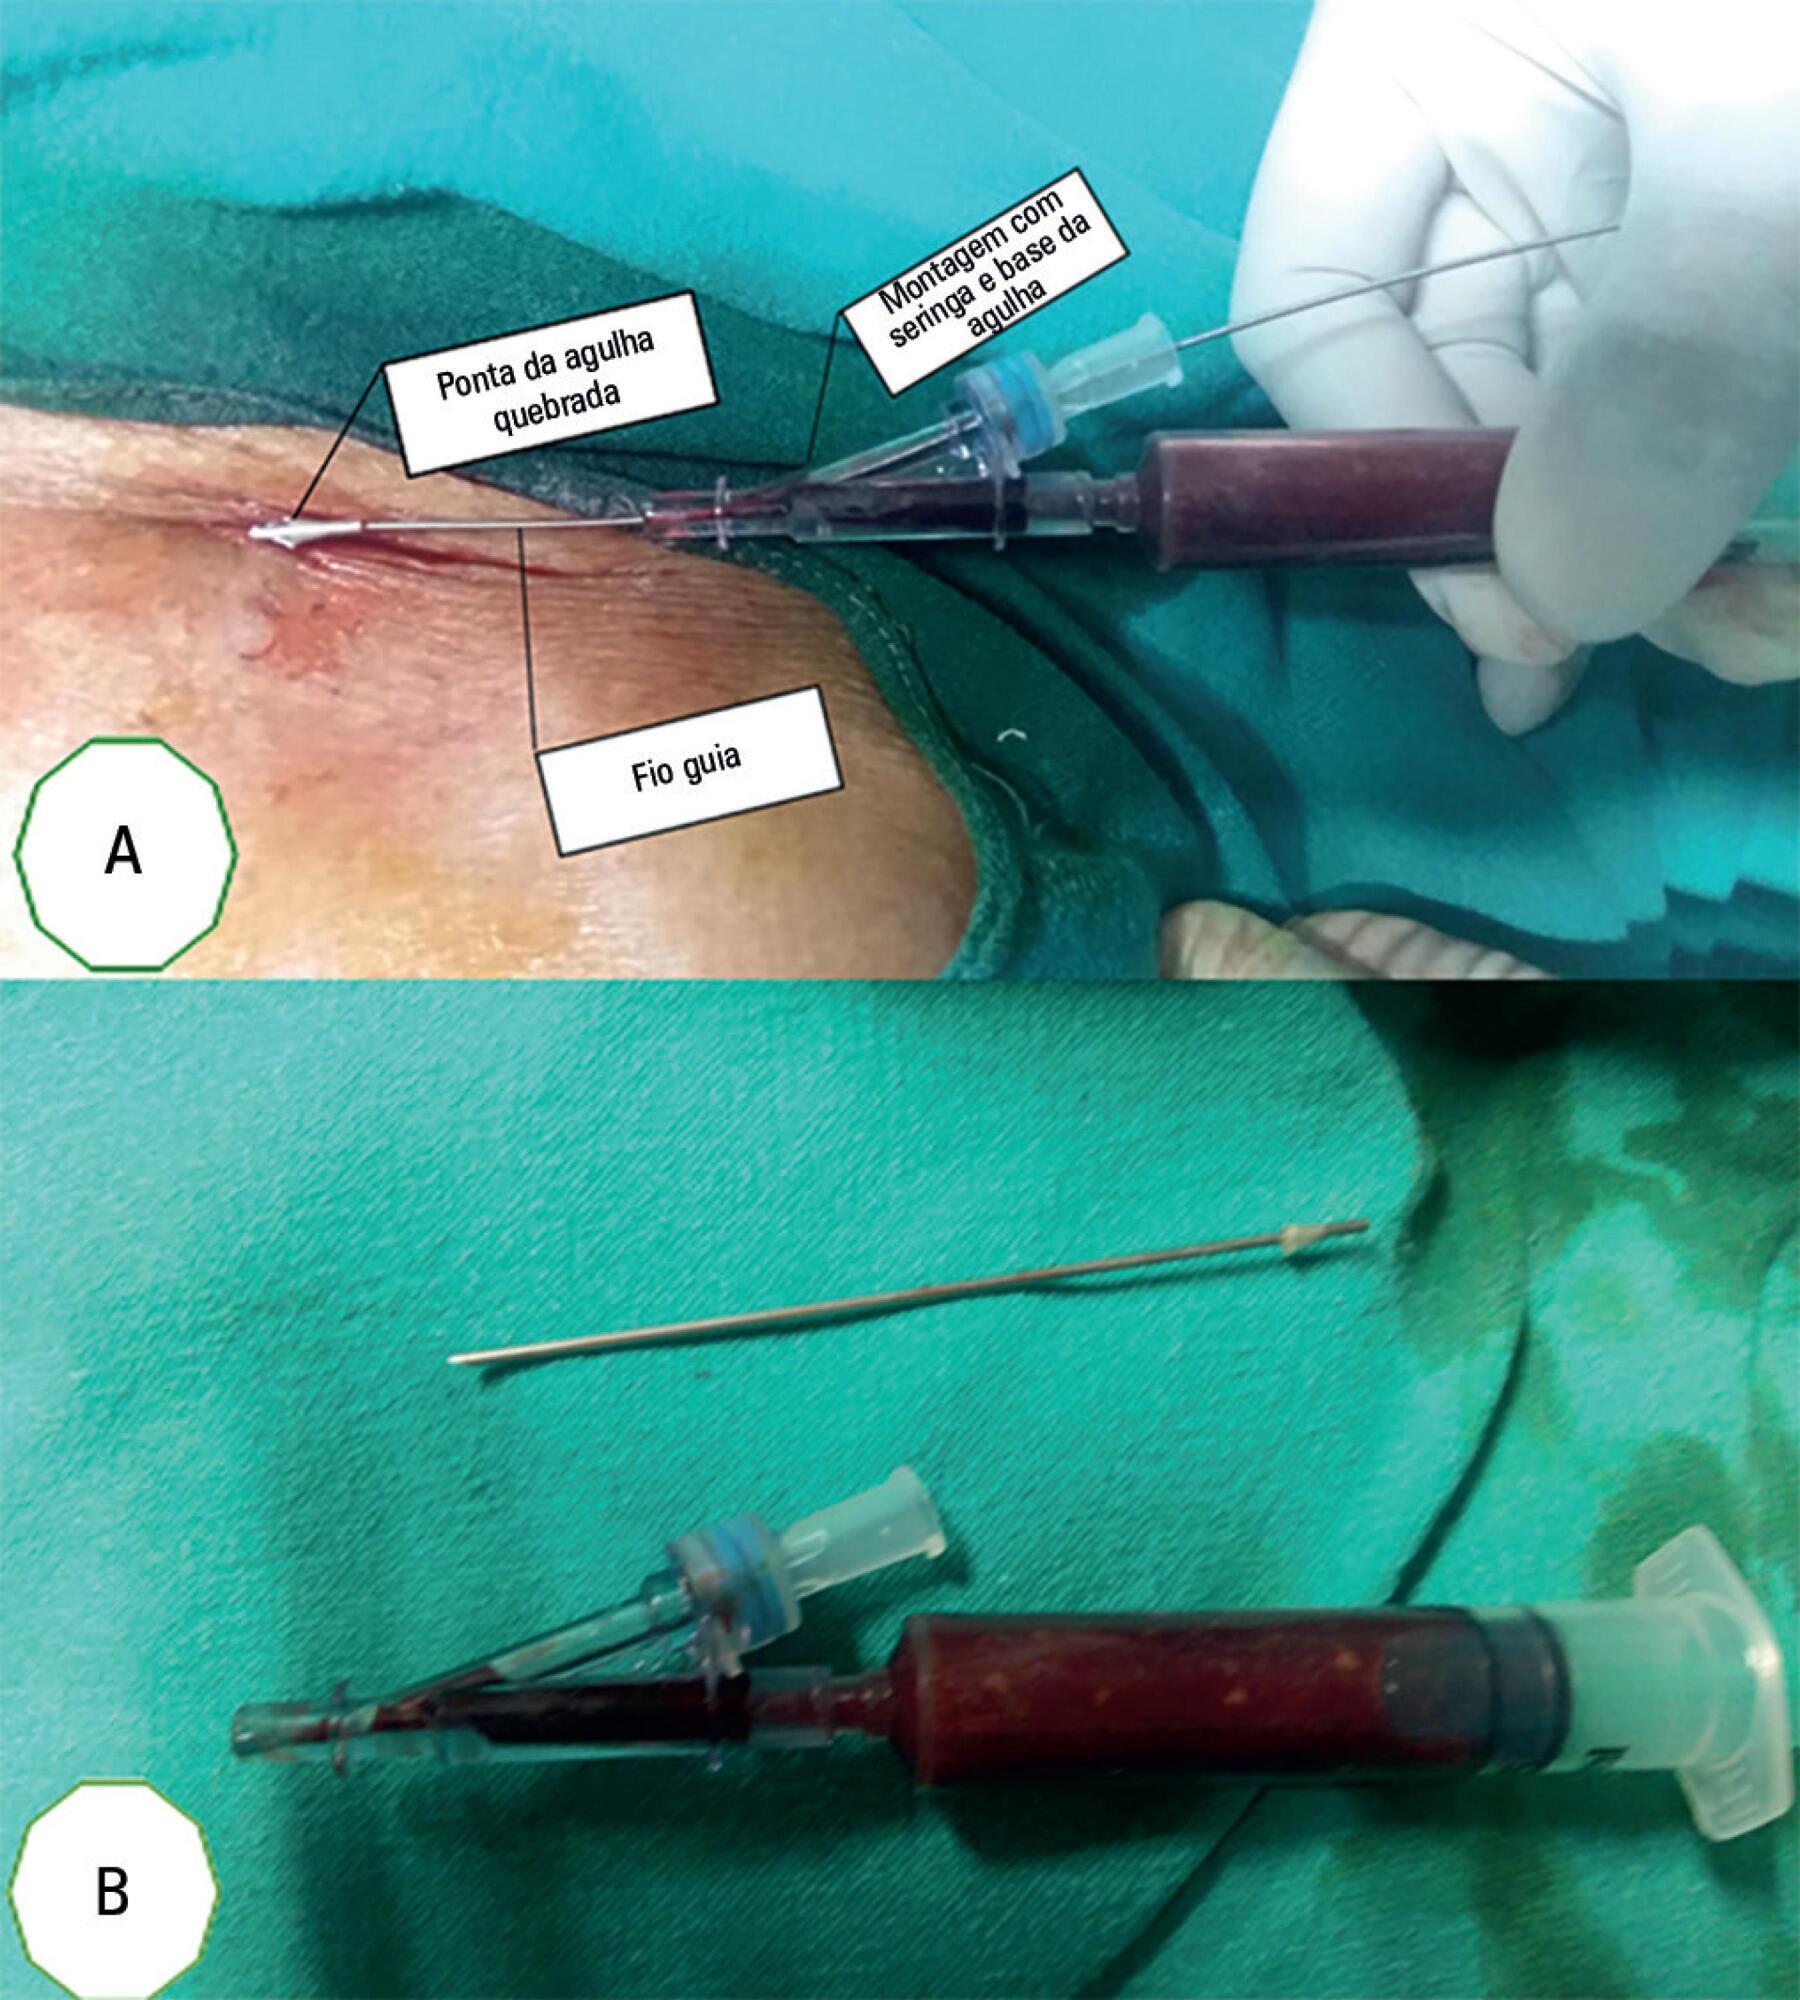 Accidental breakage of needle during subclavian vein catheterization: an adversity uncalled for!